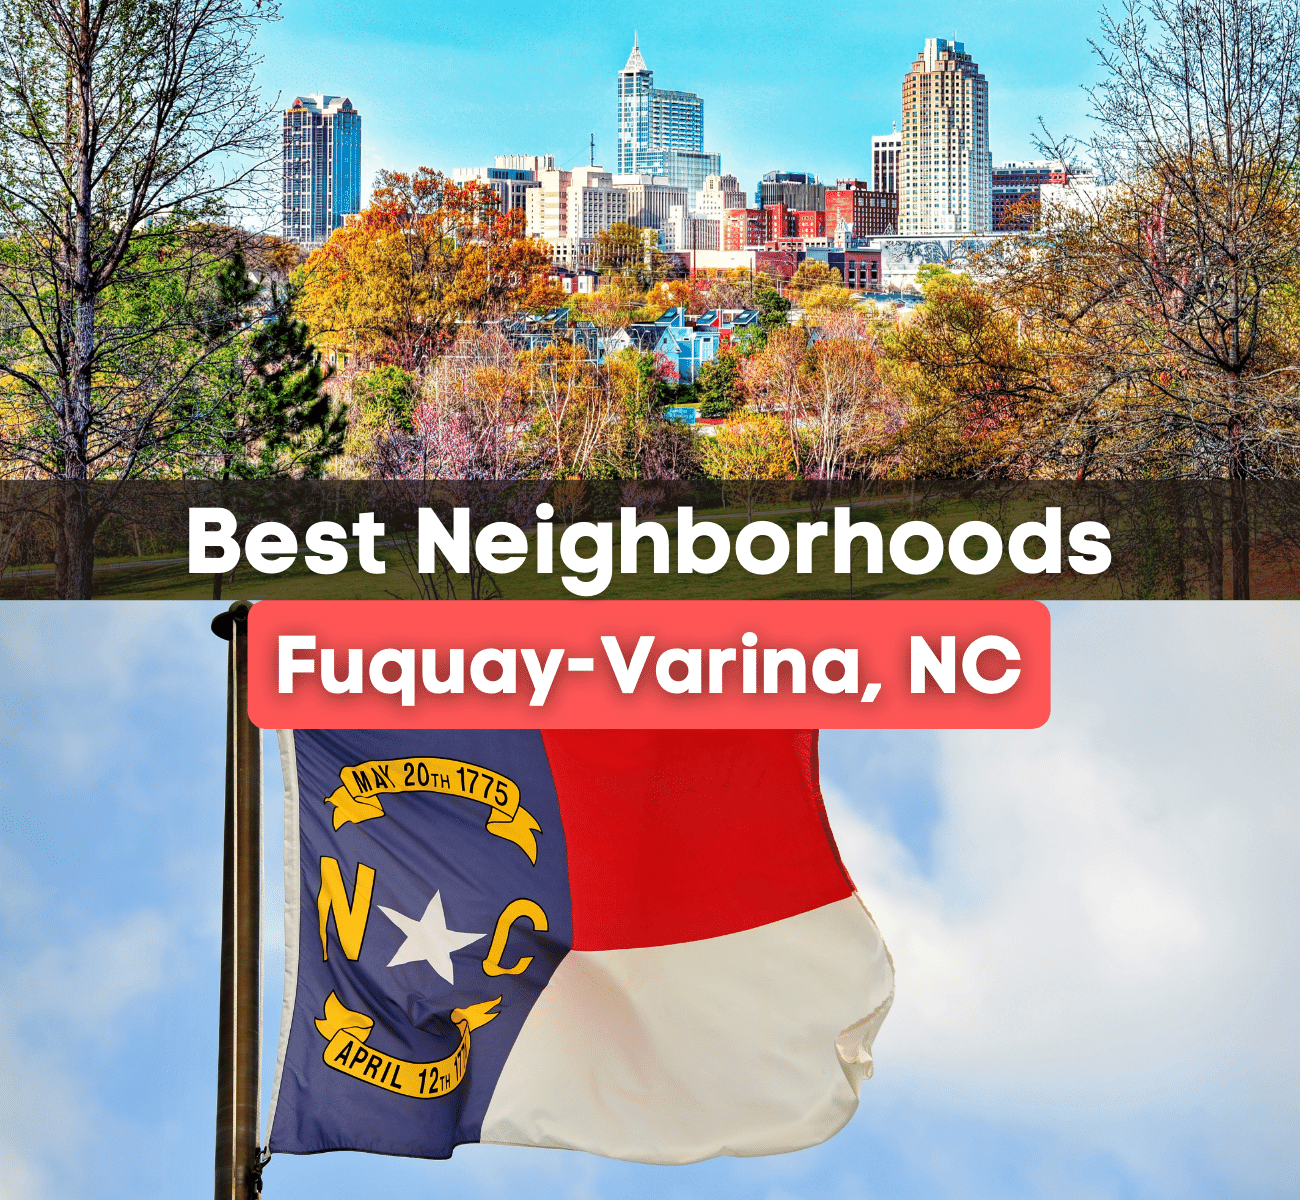 Best Neighborhoods in Fuquay-Varina - Where are the best places to live in Fuquay-Varina?